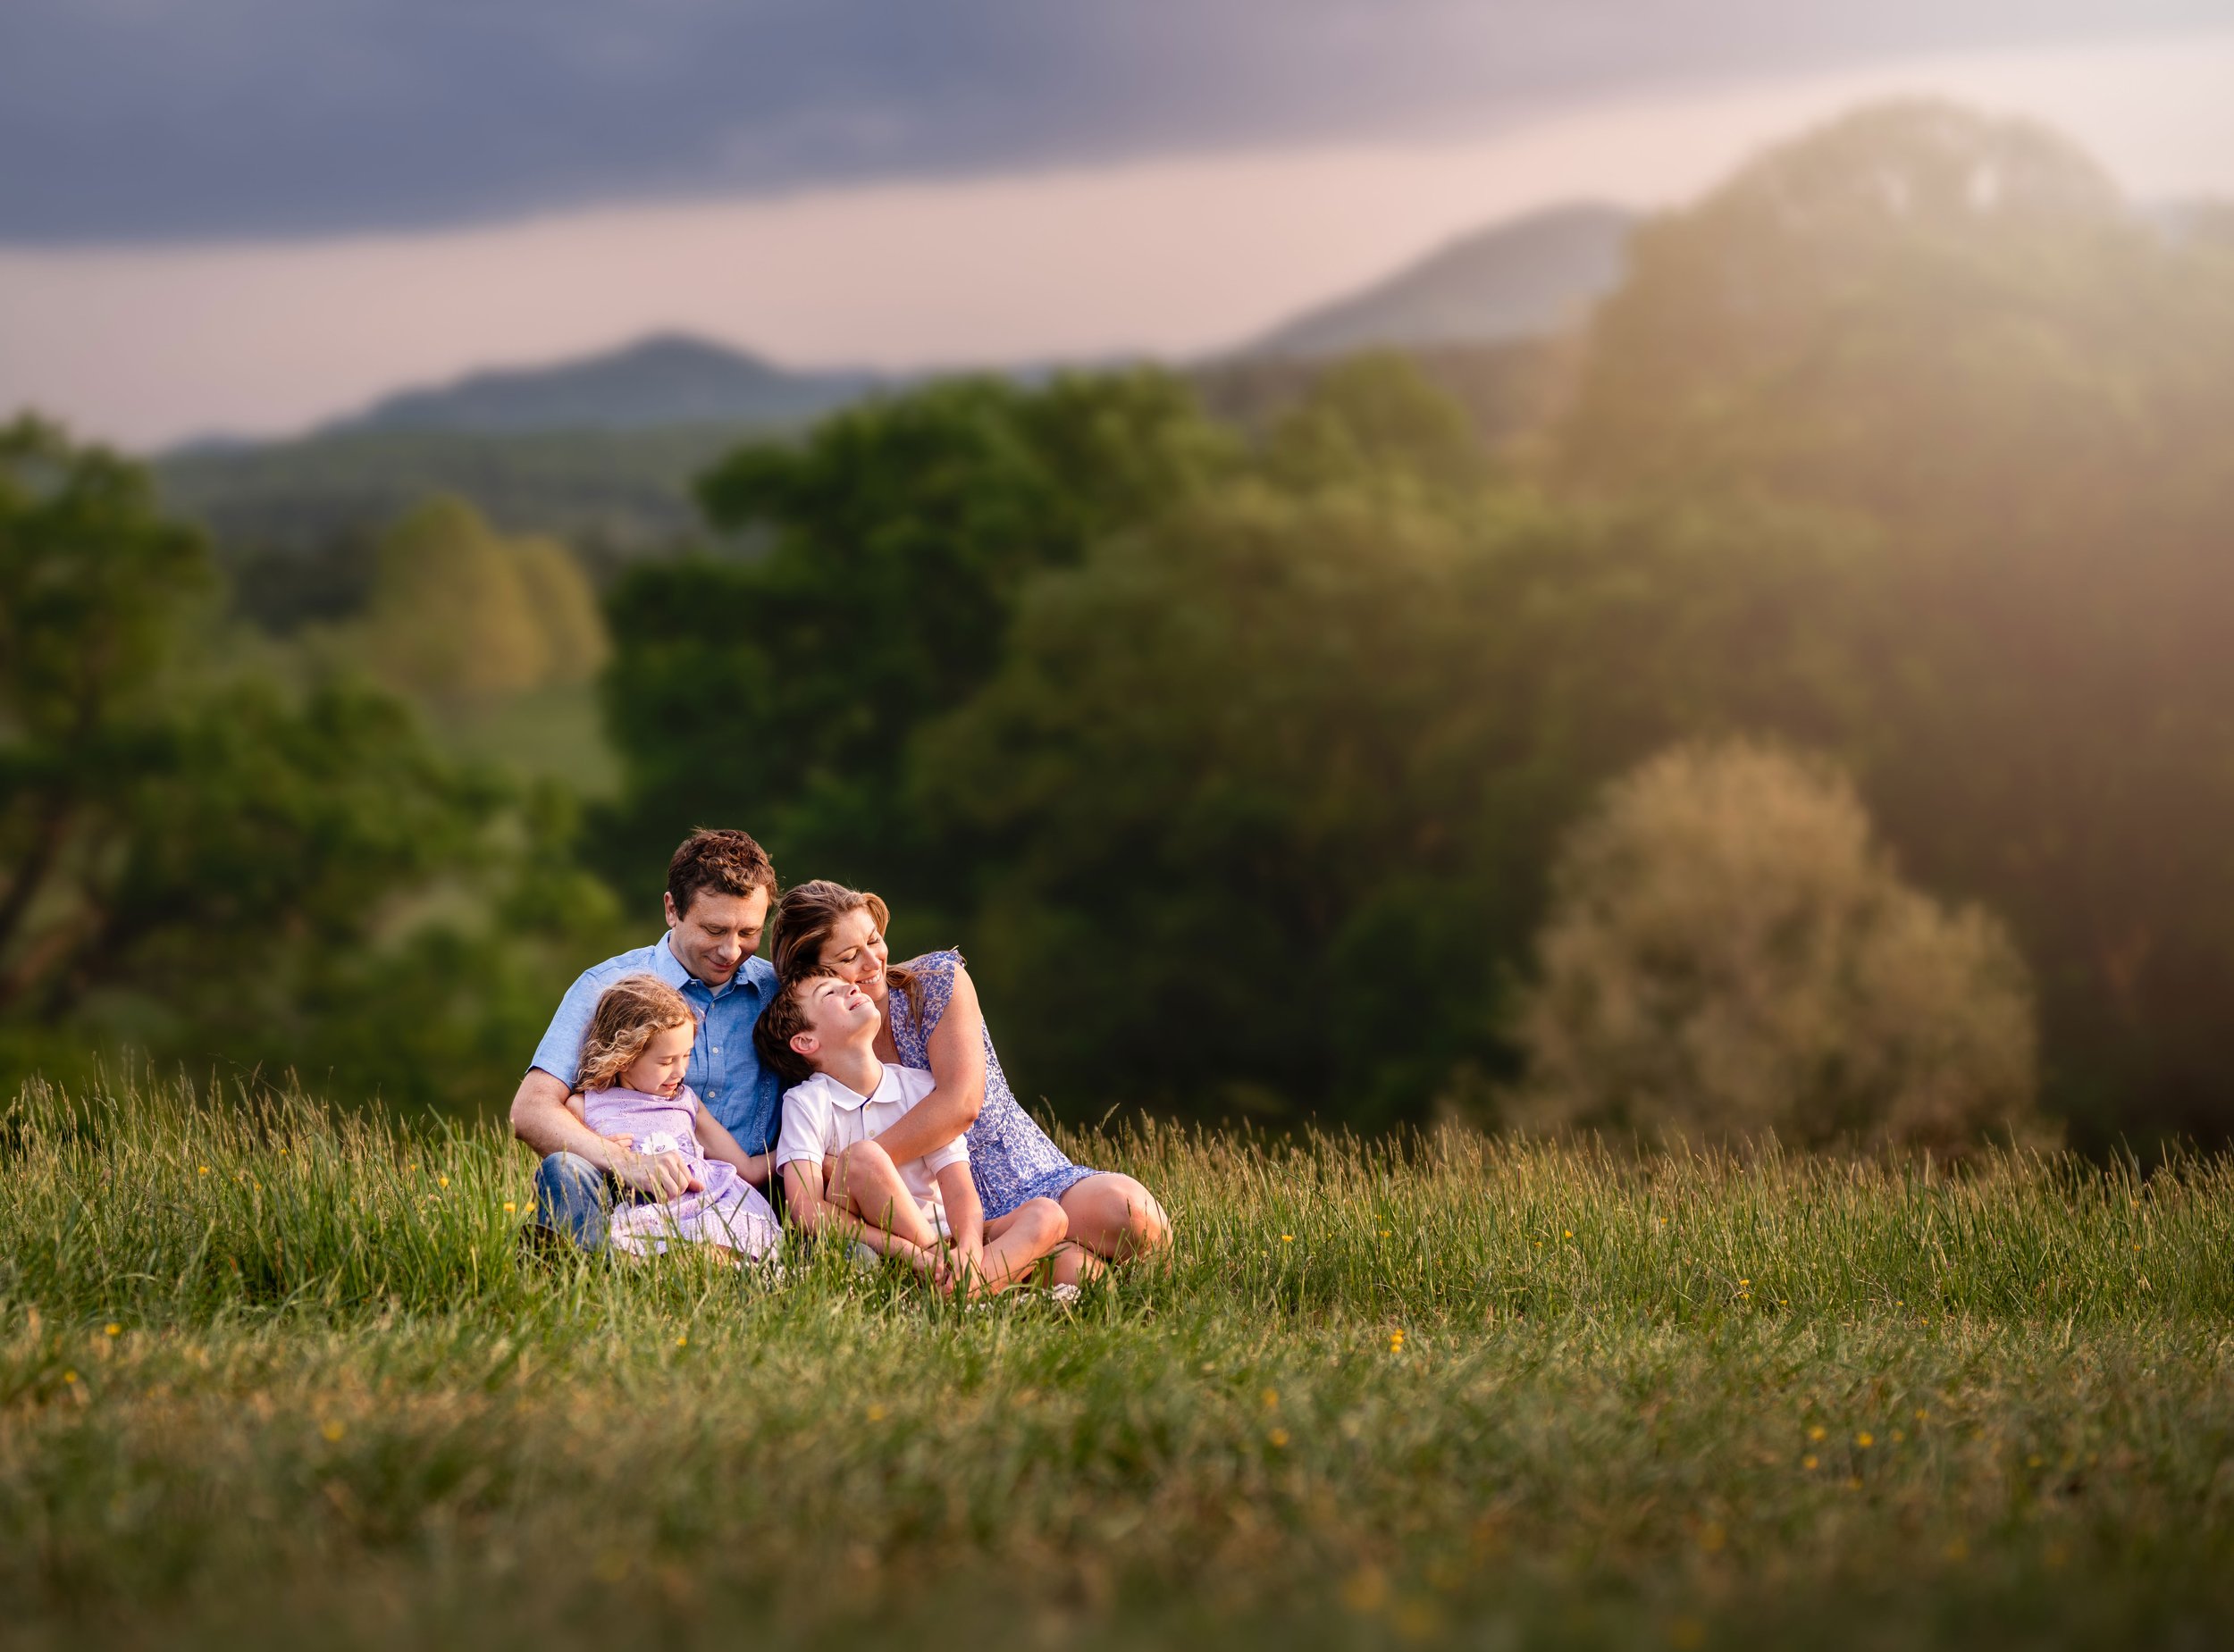 Family snuggling in the grass with mountains in the distance